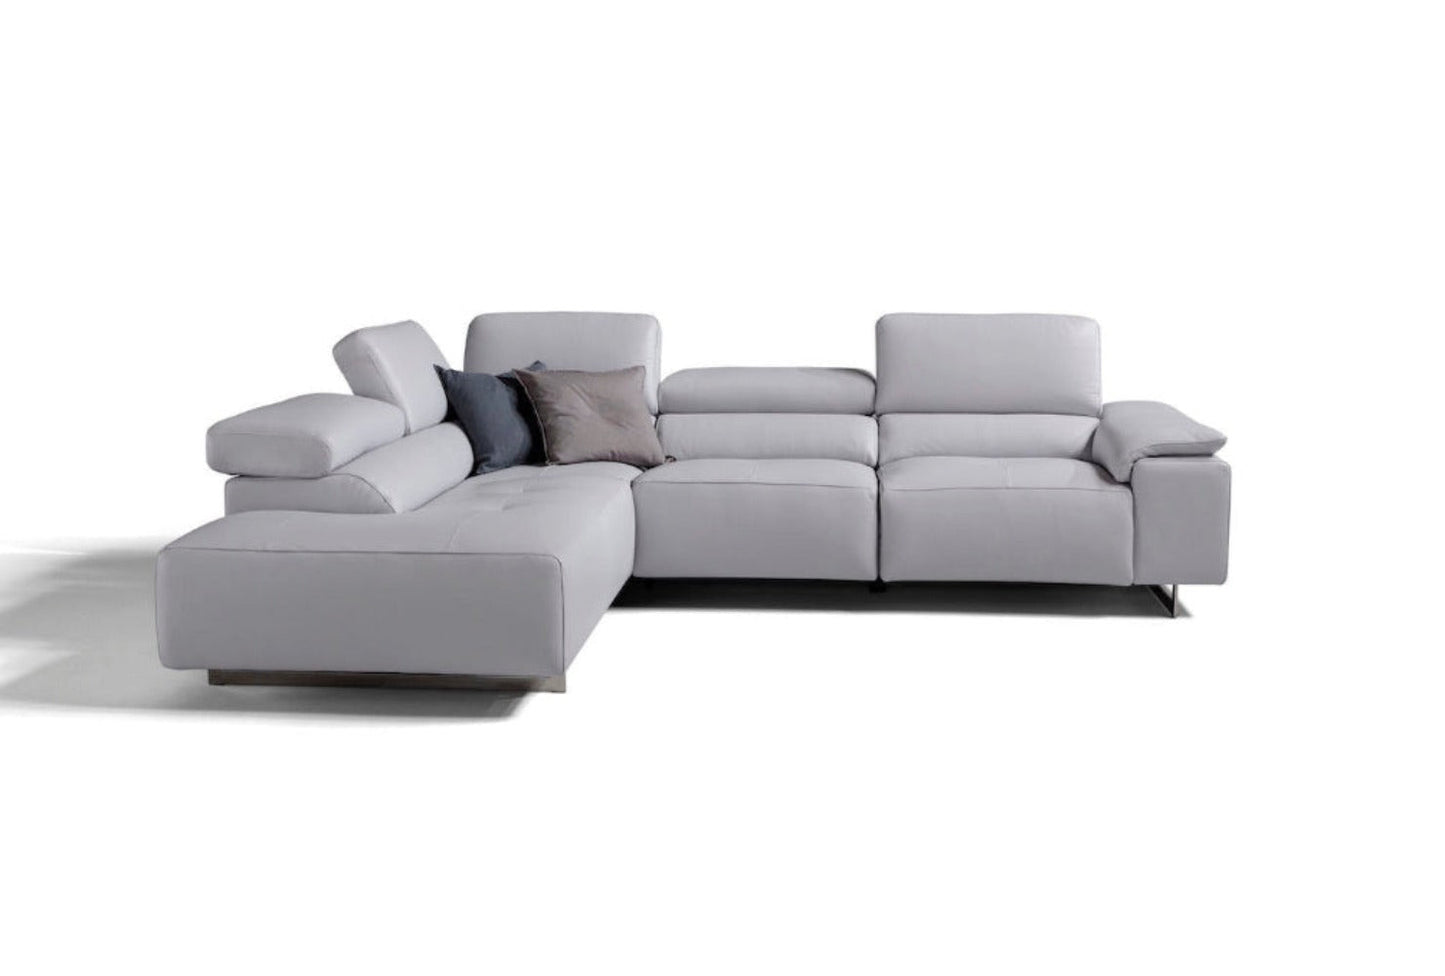 Blossom   Italian top Grade grey leather chaise sofa further reduced